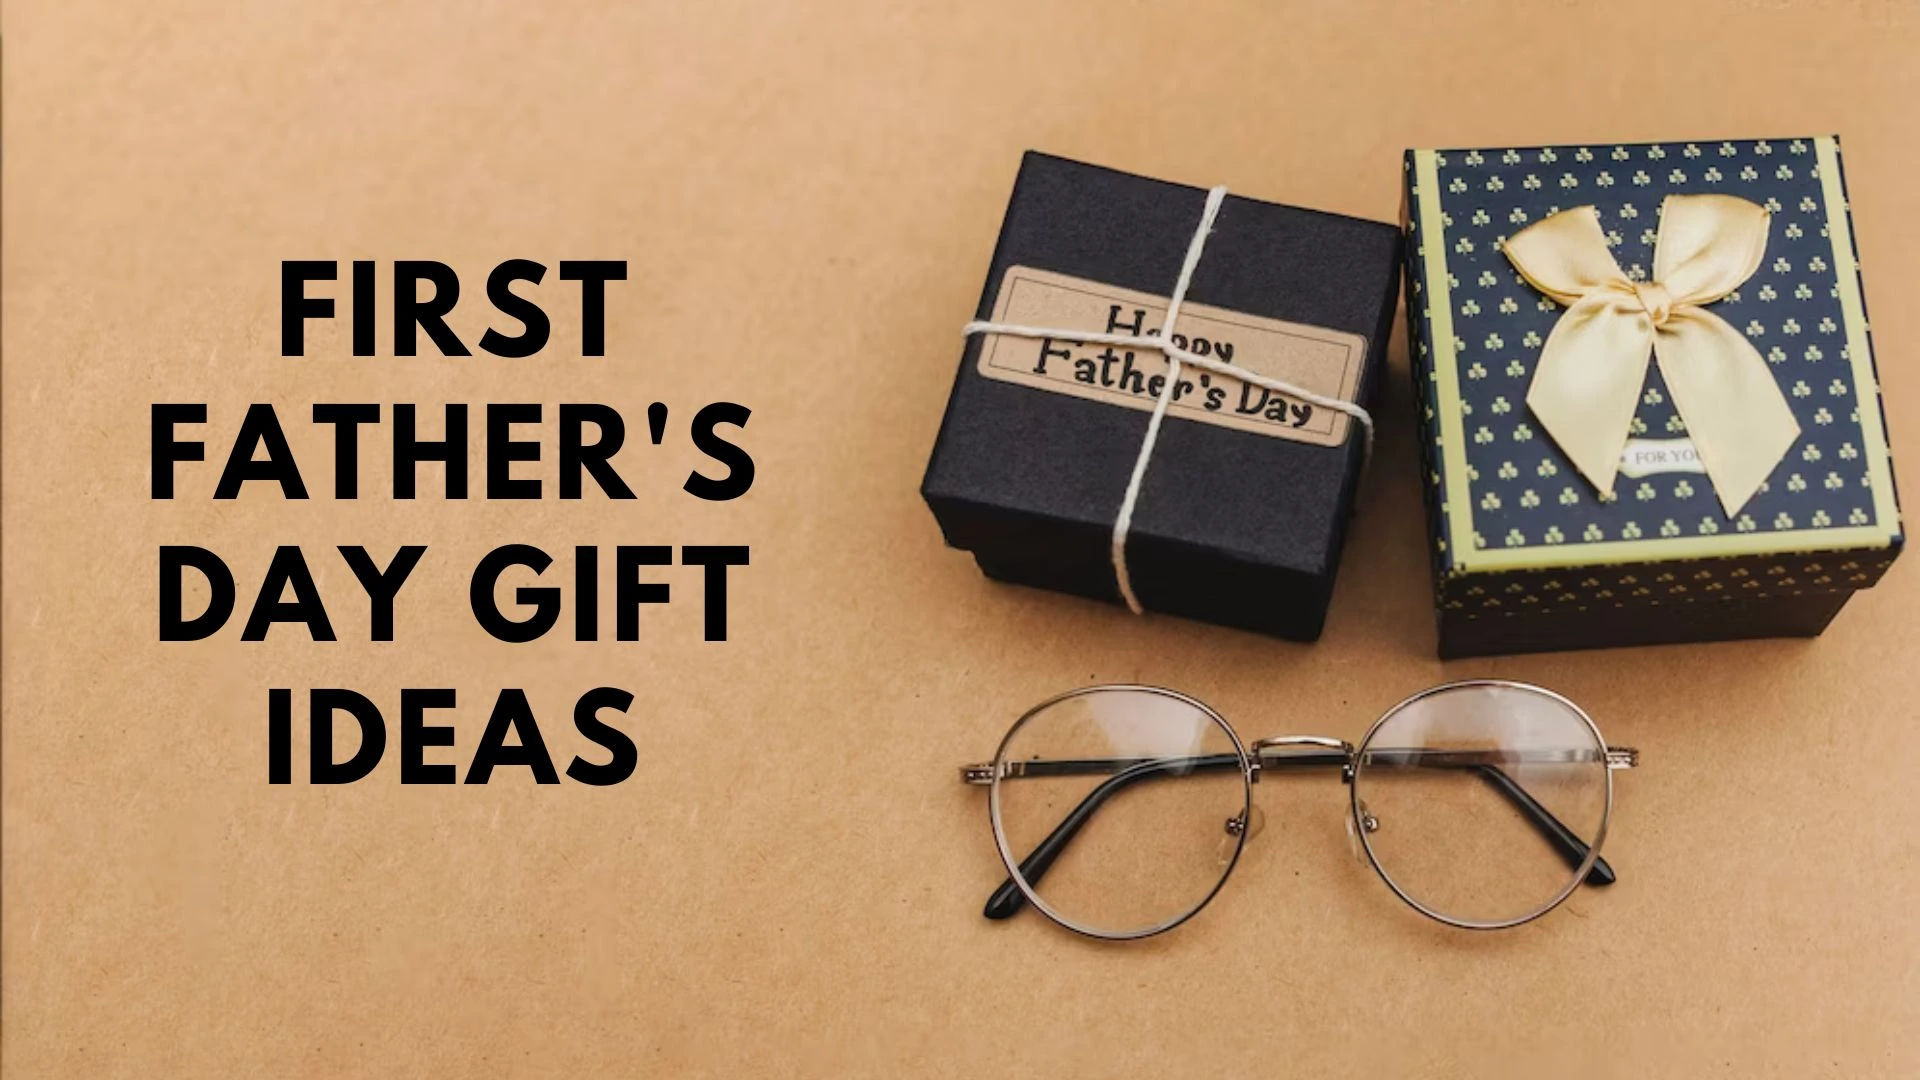 First Father's Day Gift Ideas